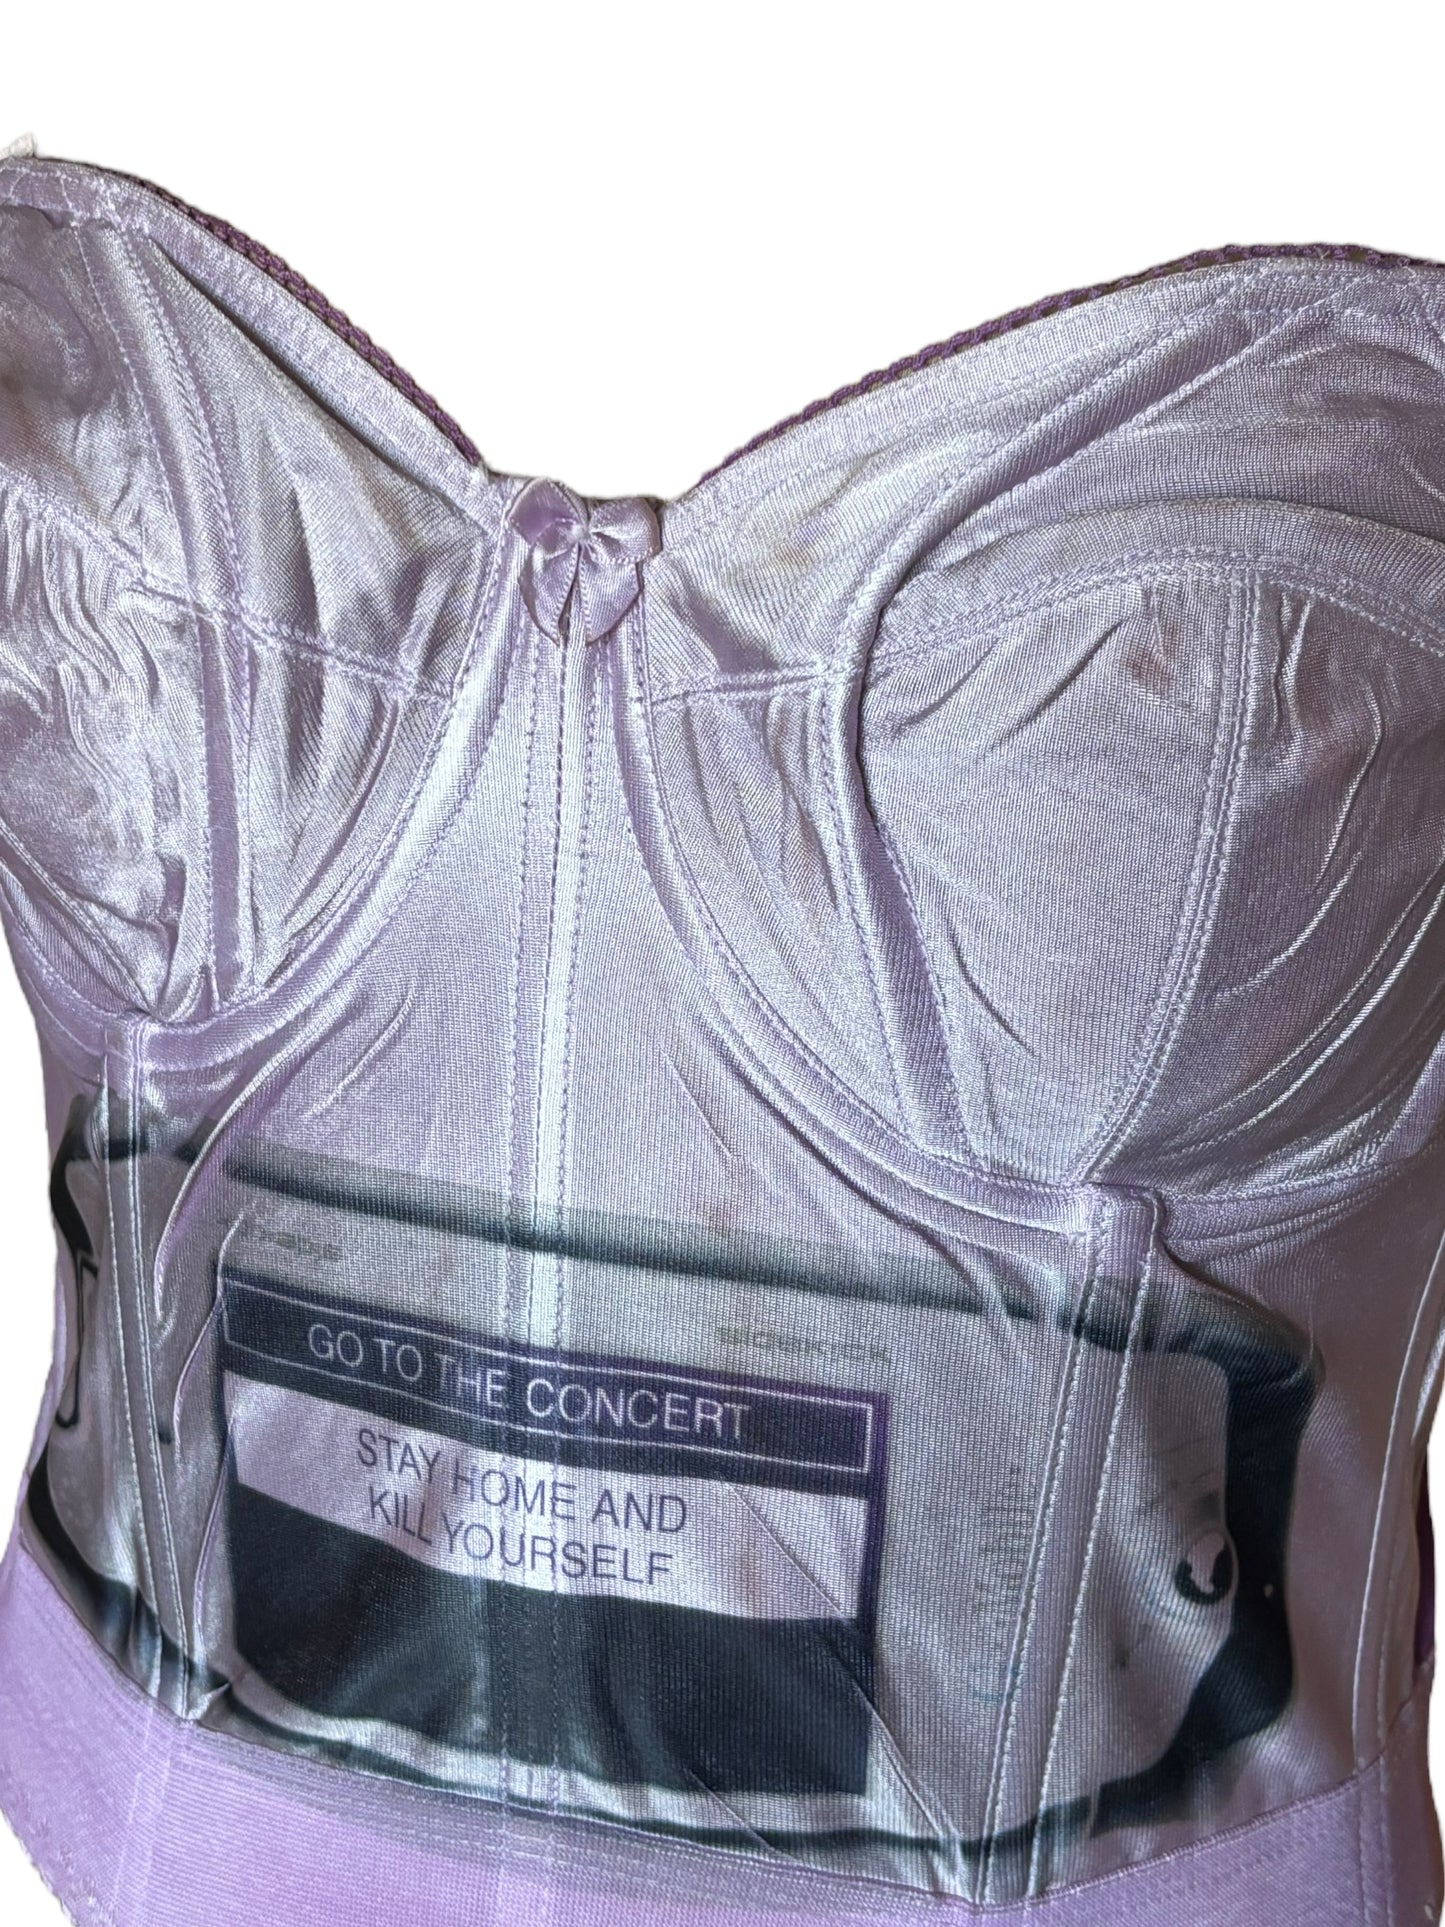 the Choice is Yours Purple Corset - M